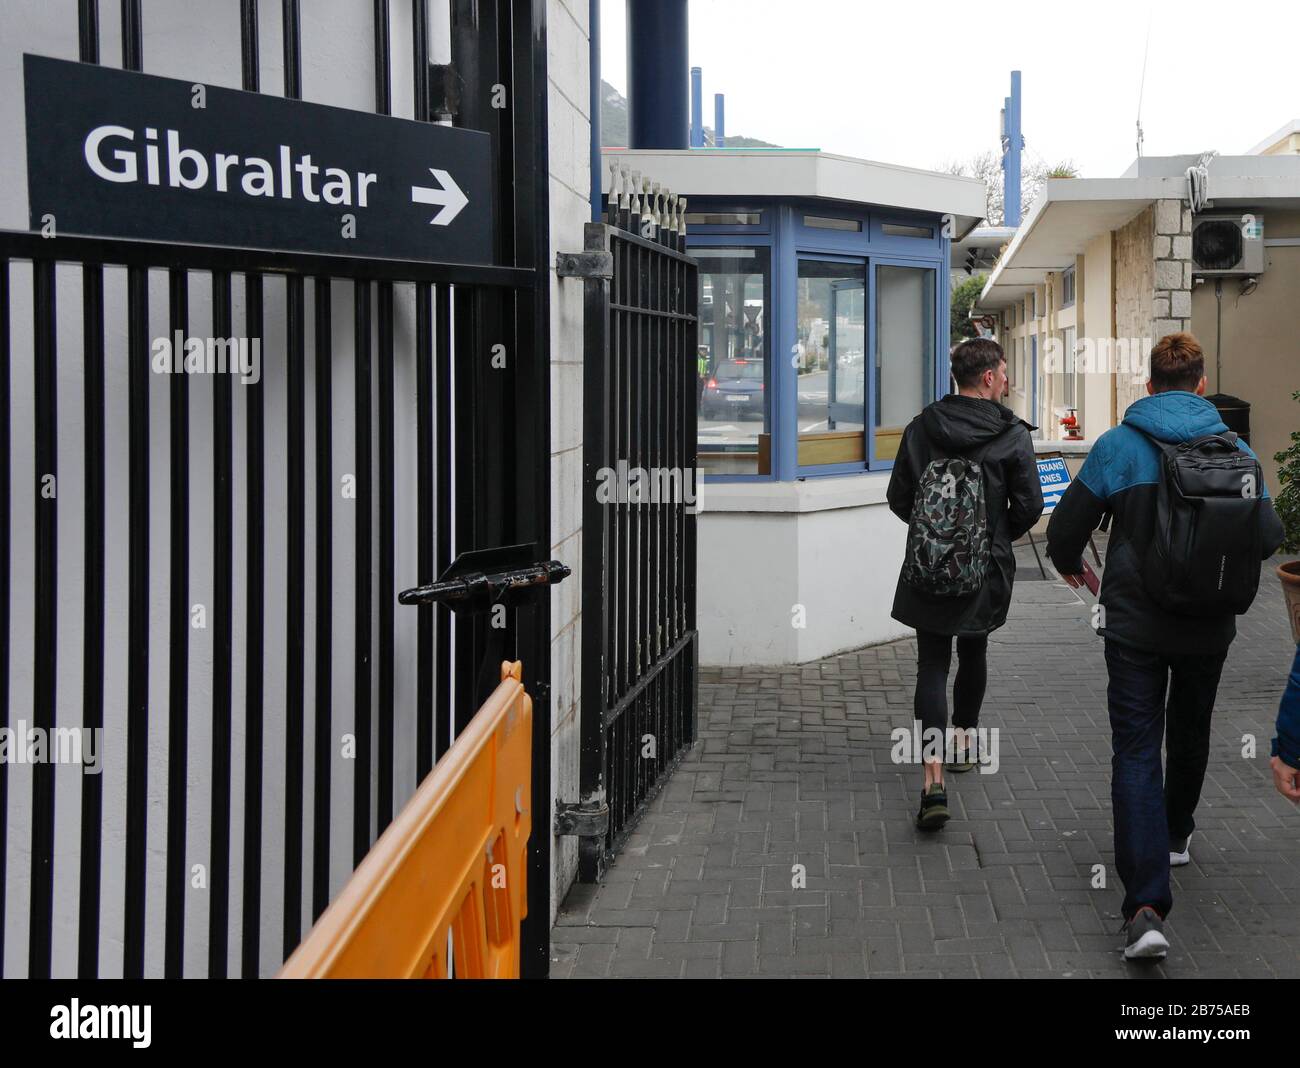 People on their way to the border crossing to Gibraltar on 14.02.2019. Thousands of Spaniards commute every day from Spain to Gibraltar to get to their workplace. Gibraltar is waiting to see how Britain's future withdrawal from the European Union might affect Gibraltar. In the 2016 brexite vote, 96 percent of Gibraltarians voted in favour of Britain remaining in the EU. [automated translation] Stock Photo